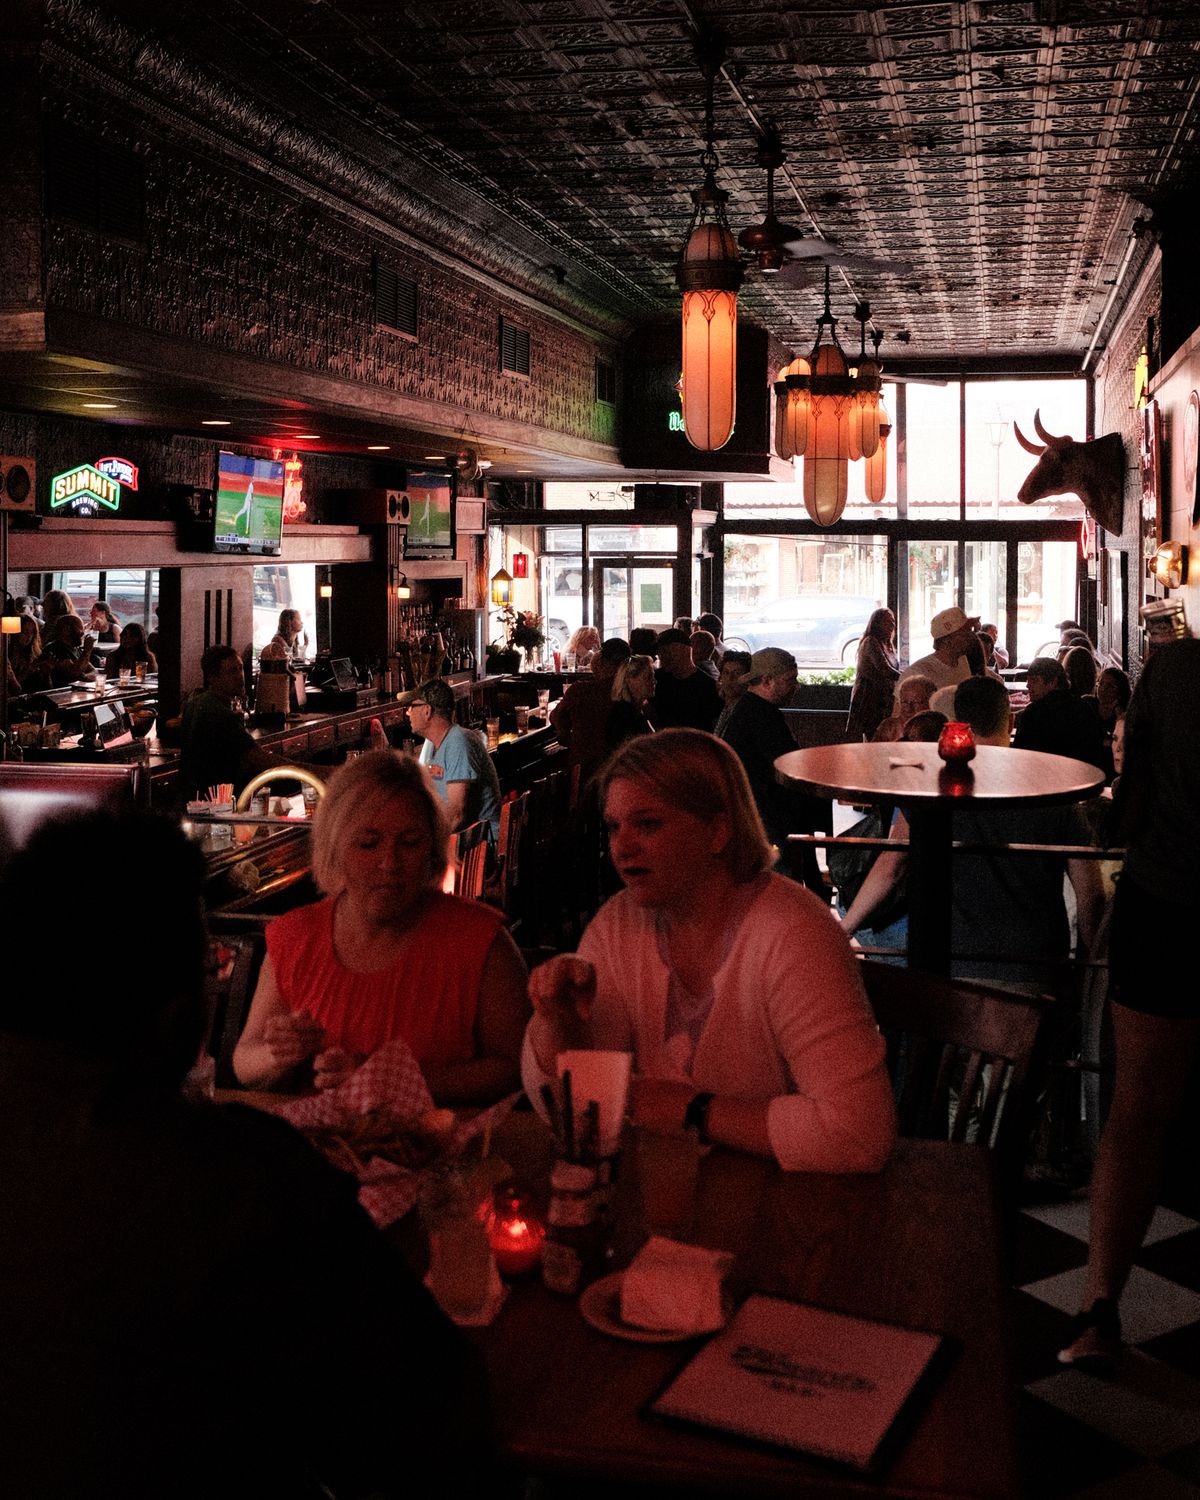 People sitting at a table; the interior of a darkened bar in the background. 